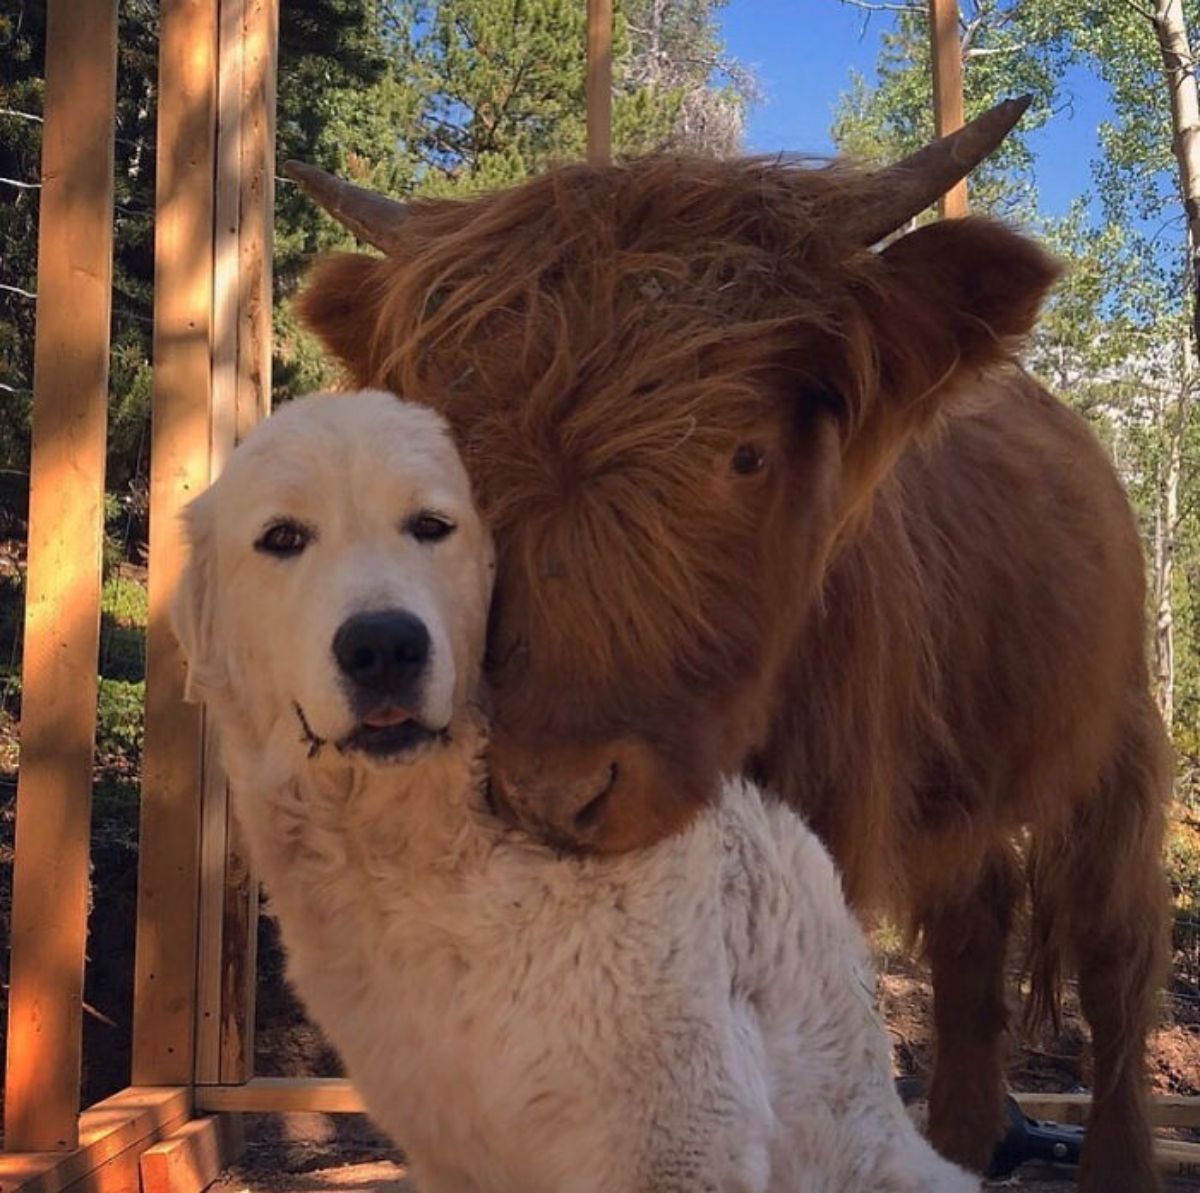 brown cow posing with a white dog